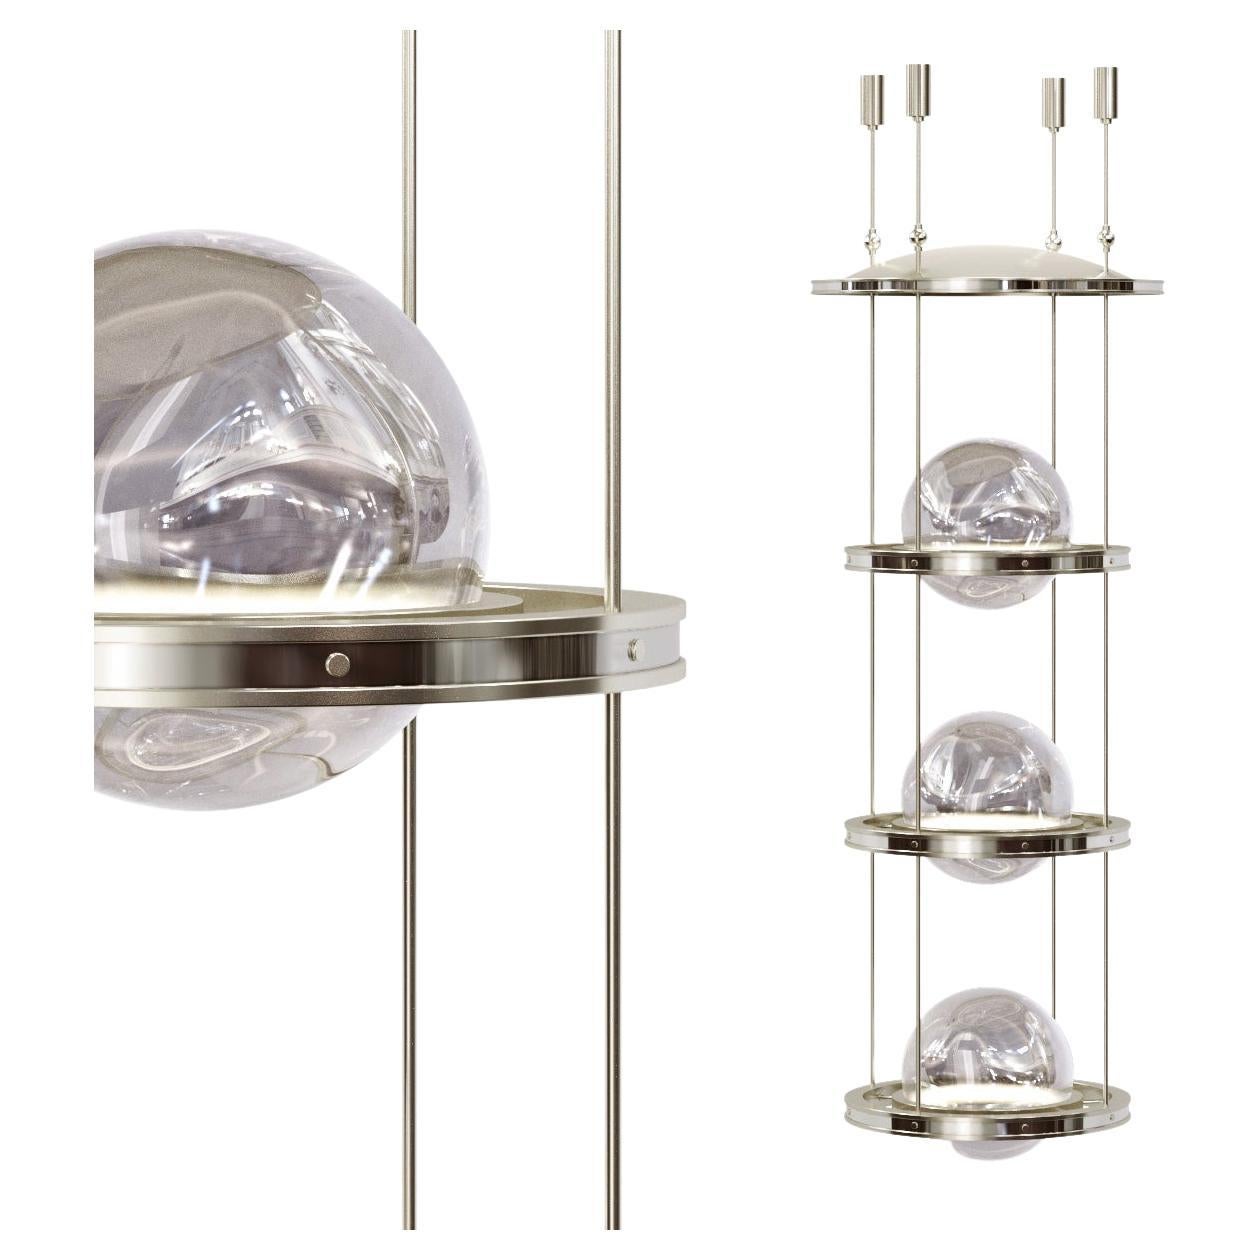 Meissa III Grand Nickel Chandelier with Art-Deco Vibes for High-Ceiling Space For Sale